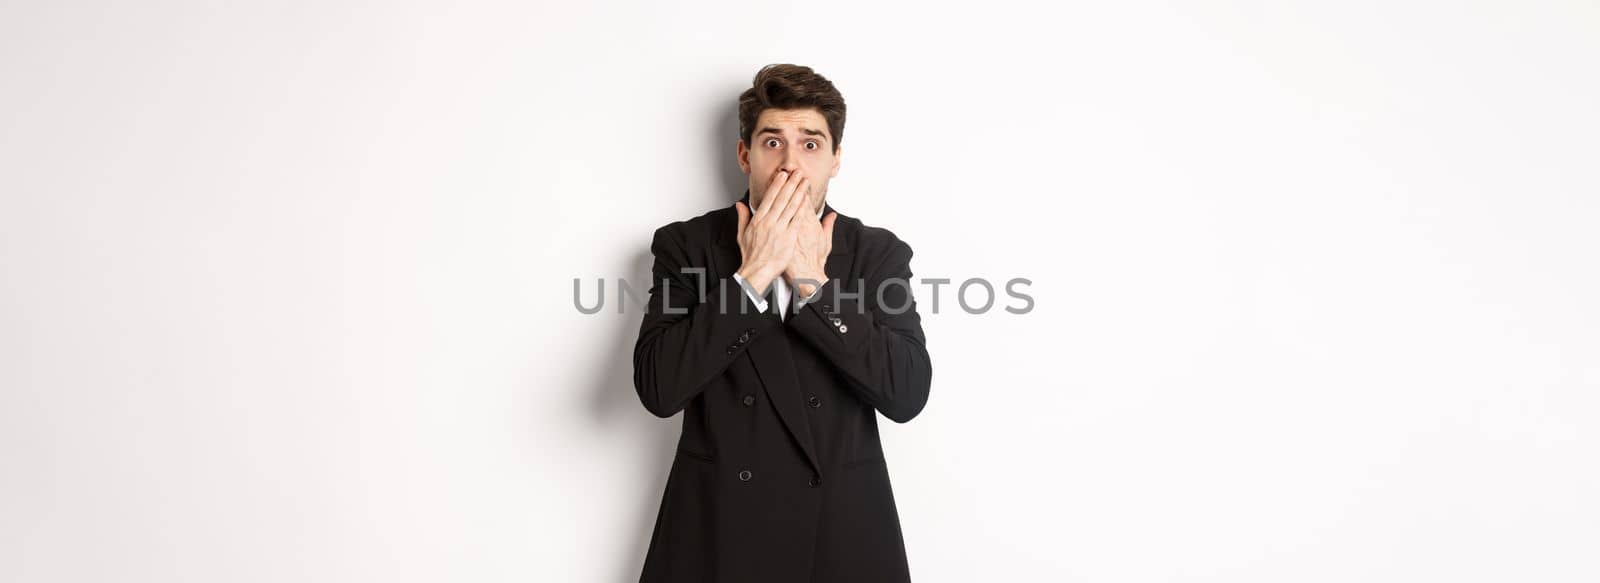 Scared man in formal suit, gasping and looking frightened at camera, standing against white background.